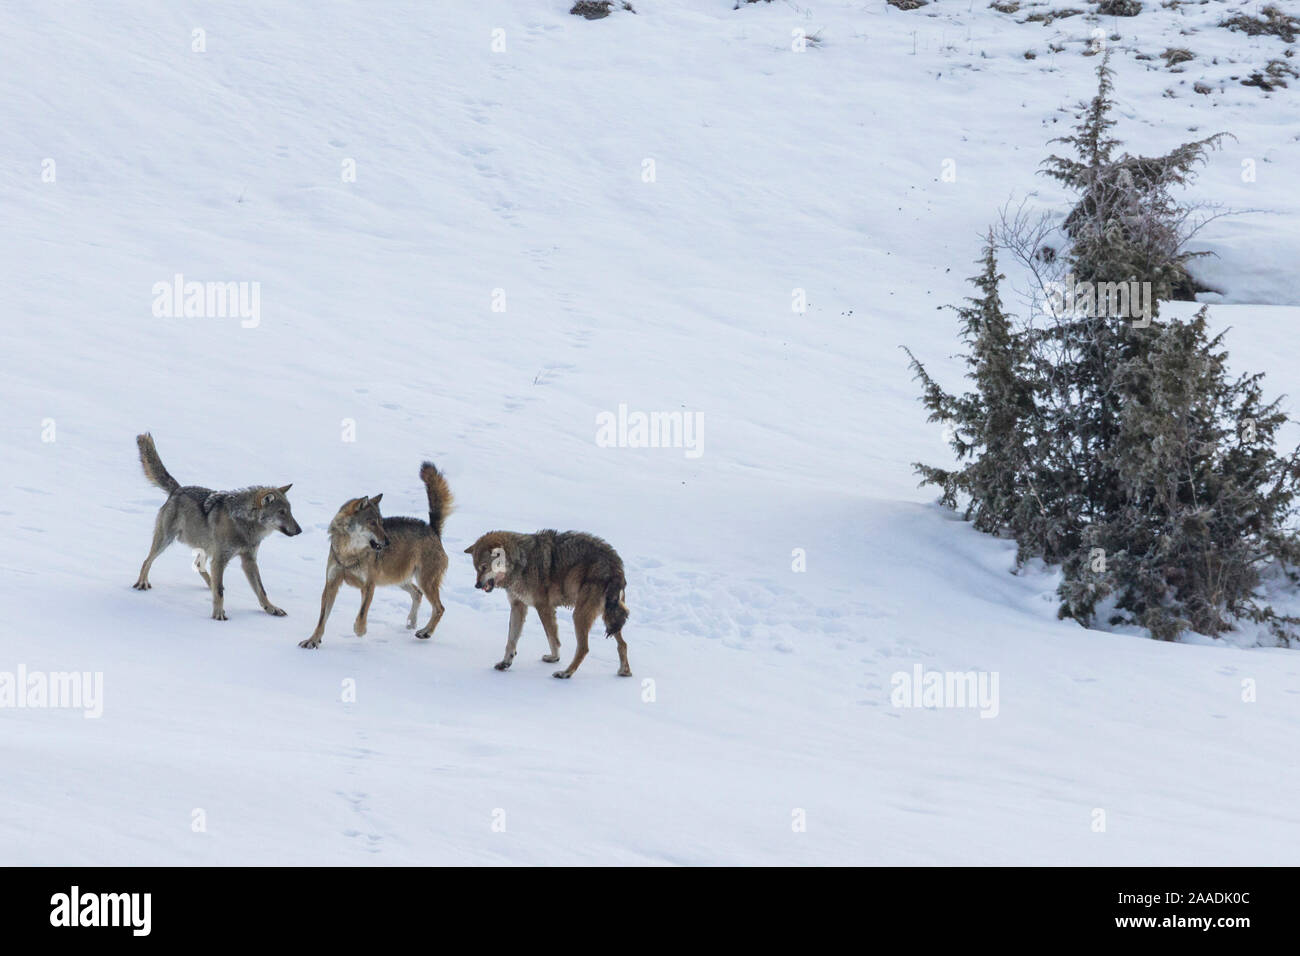 Wild Apennine wolf (Canis lupus italicus), two resident wolves attack intruder in their territory. Italian endemic subspecies. Central Apennines, Abruzzo, Italy. March.Sequence 8 of 16 Stock Photo